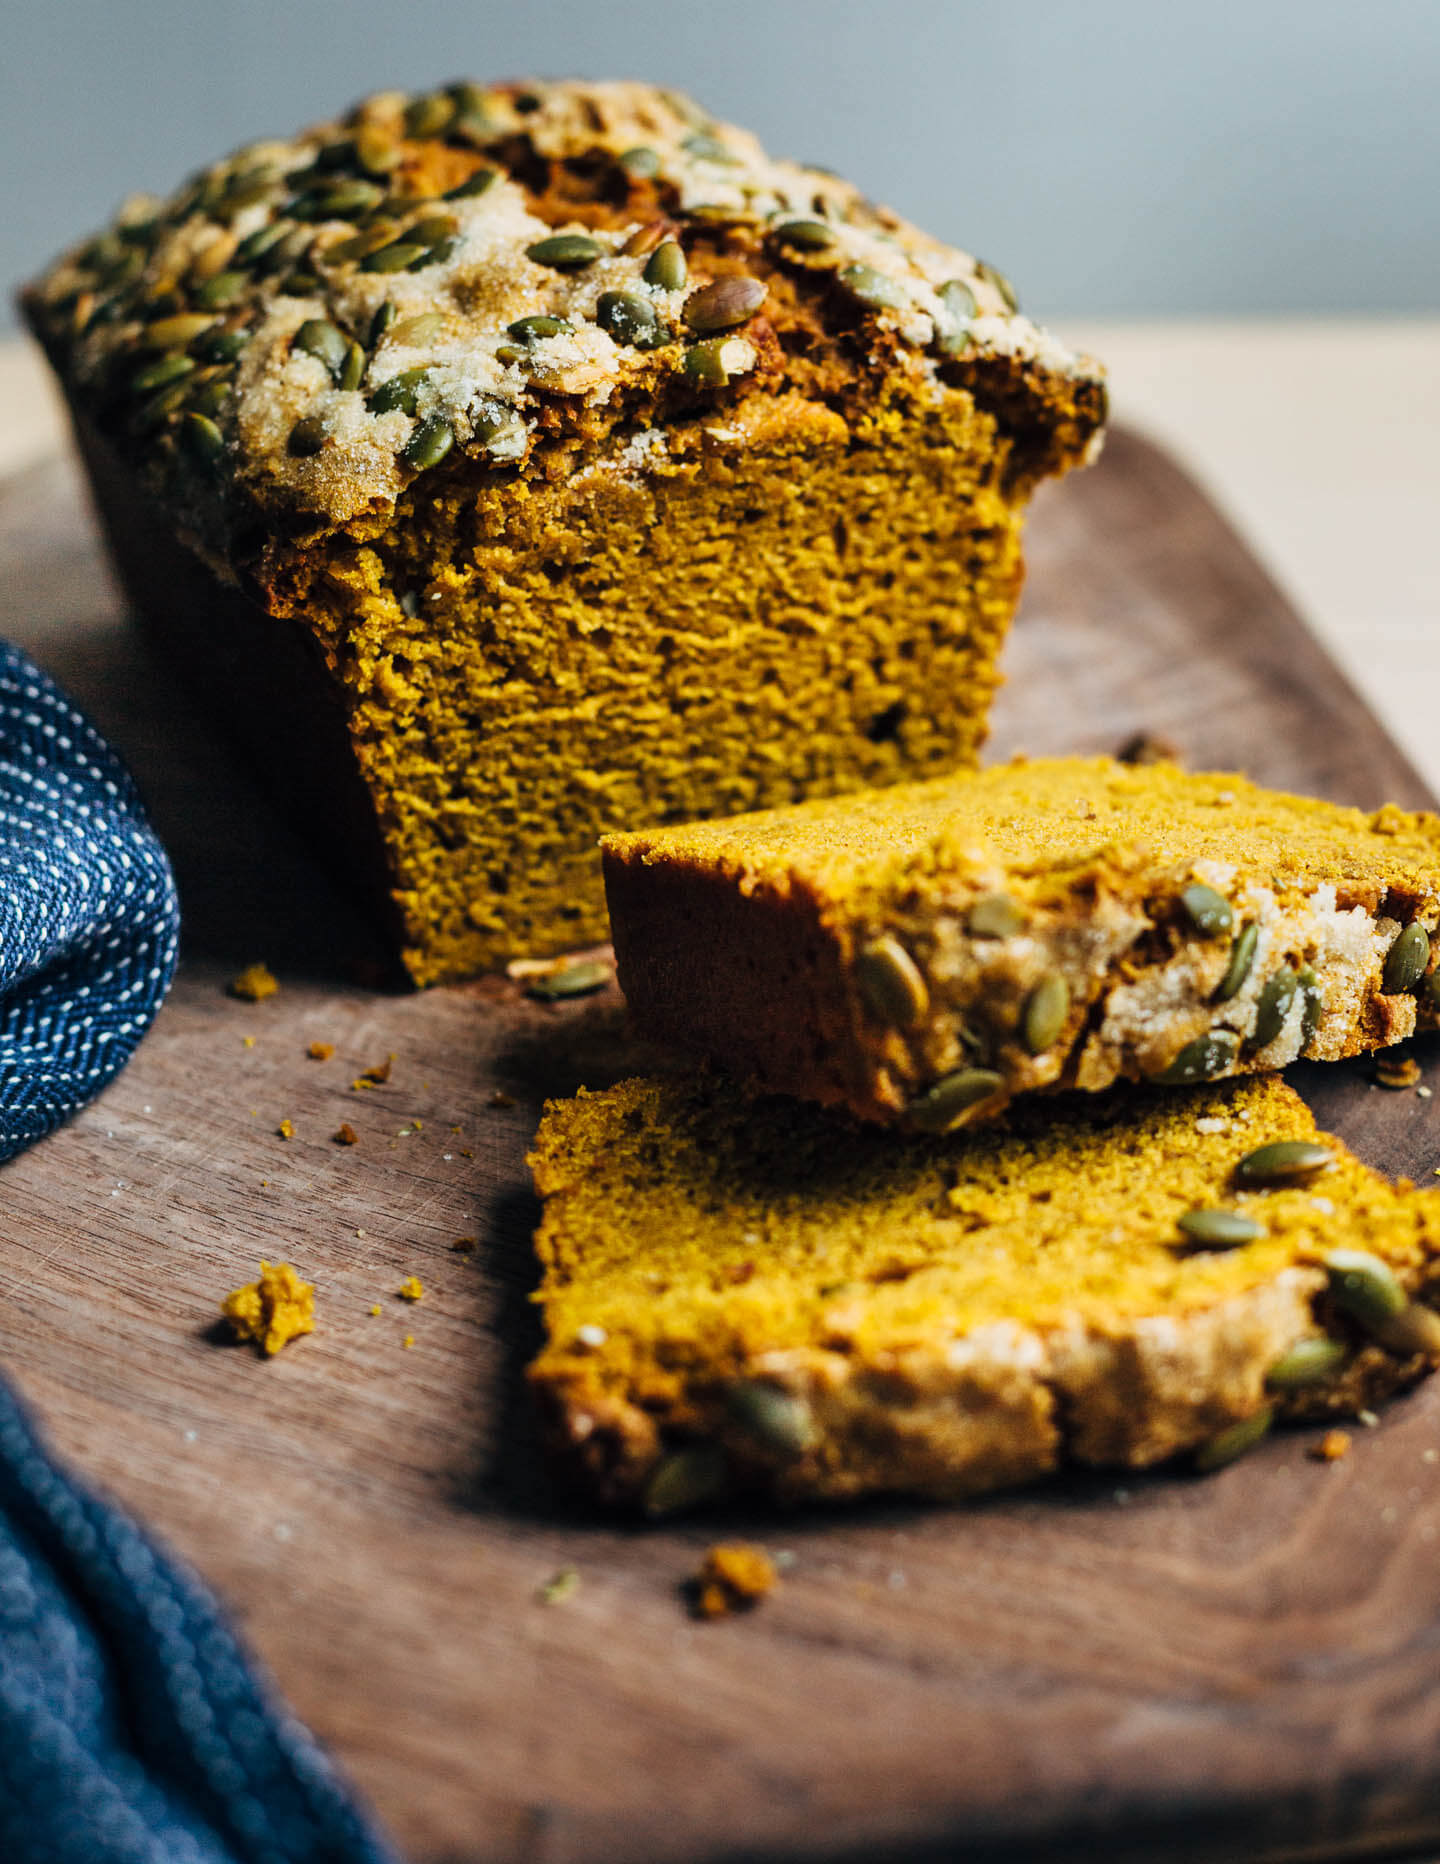 Spiced olive oil pumpkin bread is a wonderful way to harness the flavors of the season. Fresh roasted winter squash imbues this pumpkin bread recipe with rich, wonderfully of-the-moment flavor. 